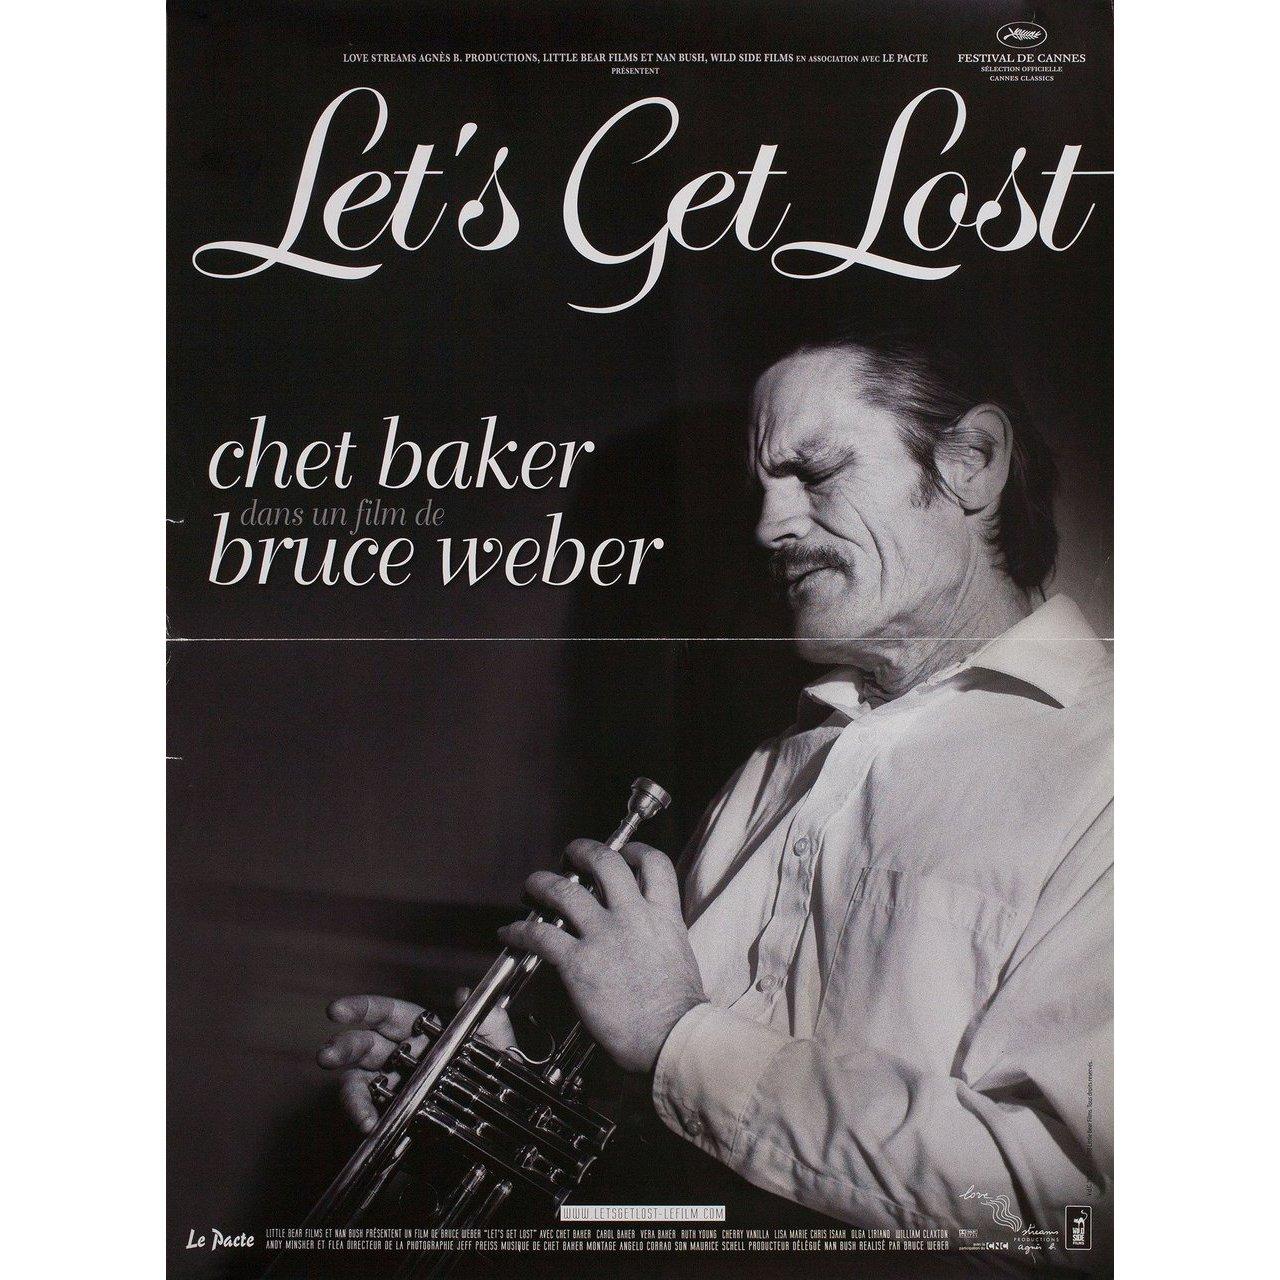 Original 2008 re-release French petite poster for the 1988 documentary film Let's Get Lost directed by Bruce Weber with Chet Baker / Carol Baker / Vera Baker / Paul Baker. Very Good-Fine condition, folded. Many original posters were issued folded or